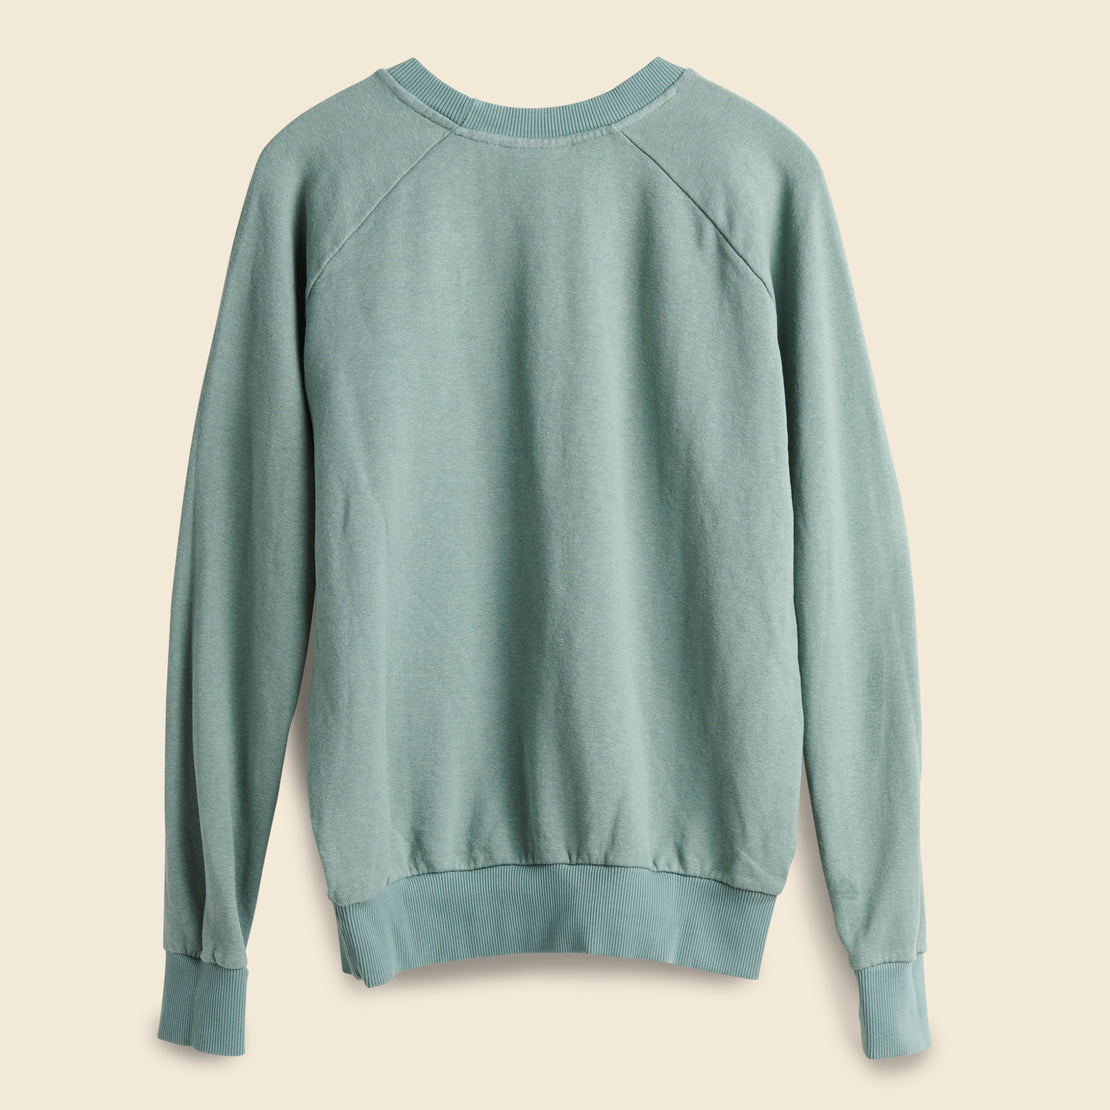 DAUGHTER Sweatshirt - Sage/Gold - Fort Lonesome - STAG Provisions - W - Tops - L/S Fleece